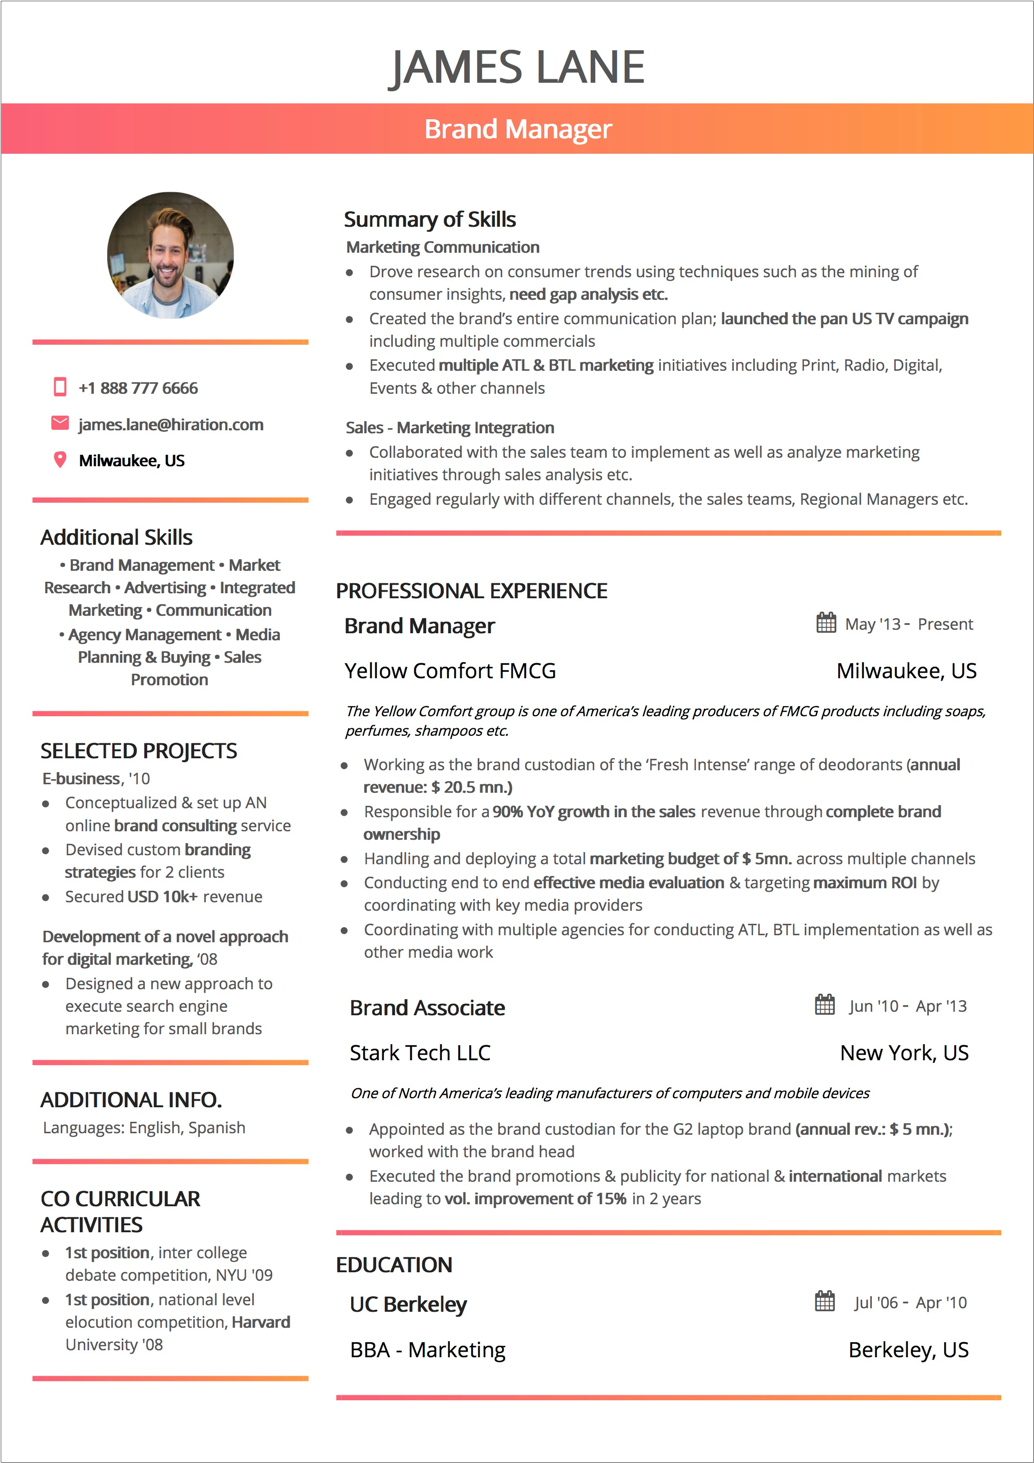 Resume Format 2021 Guide with Examples